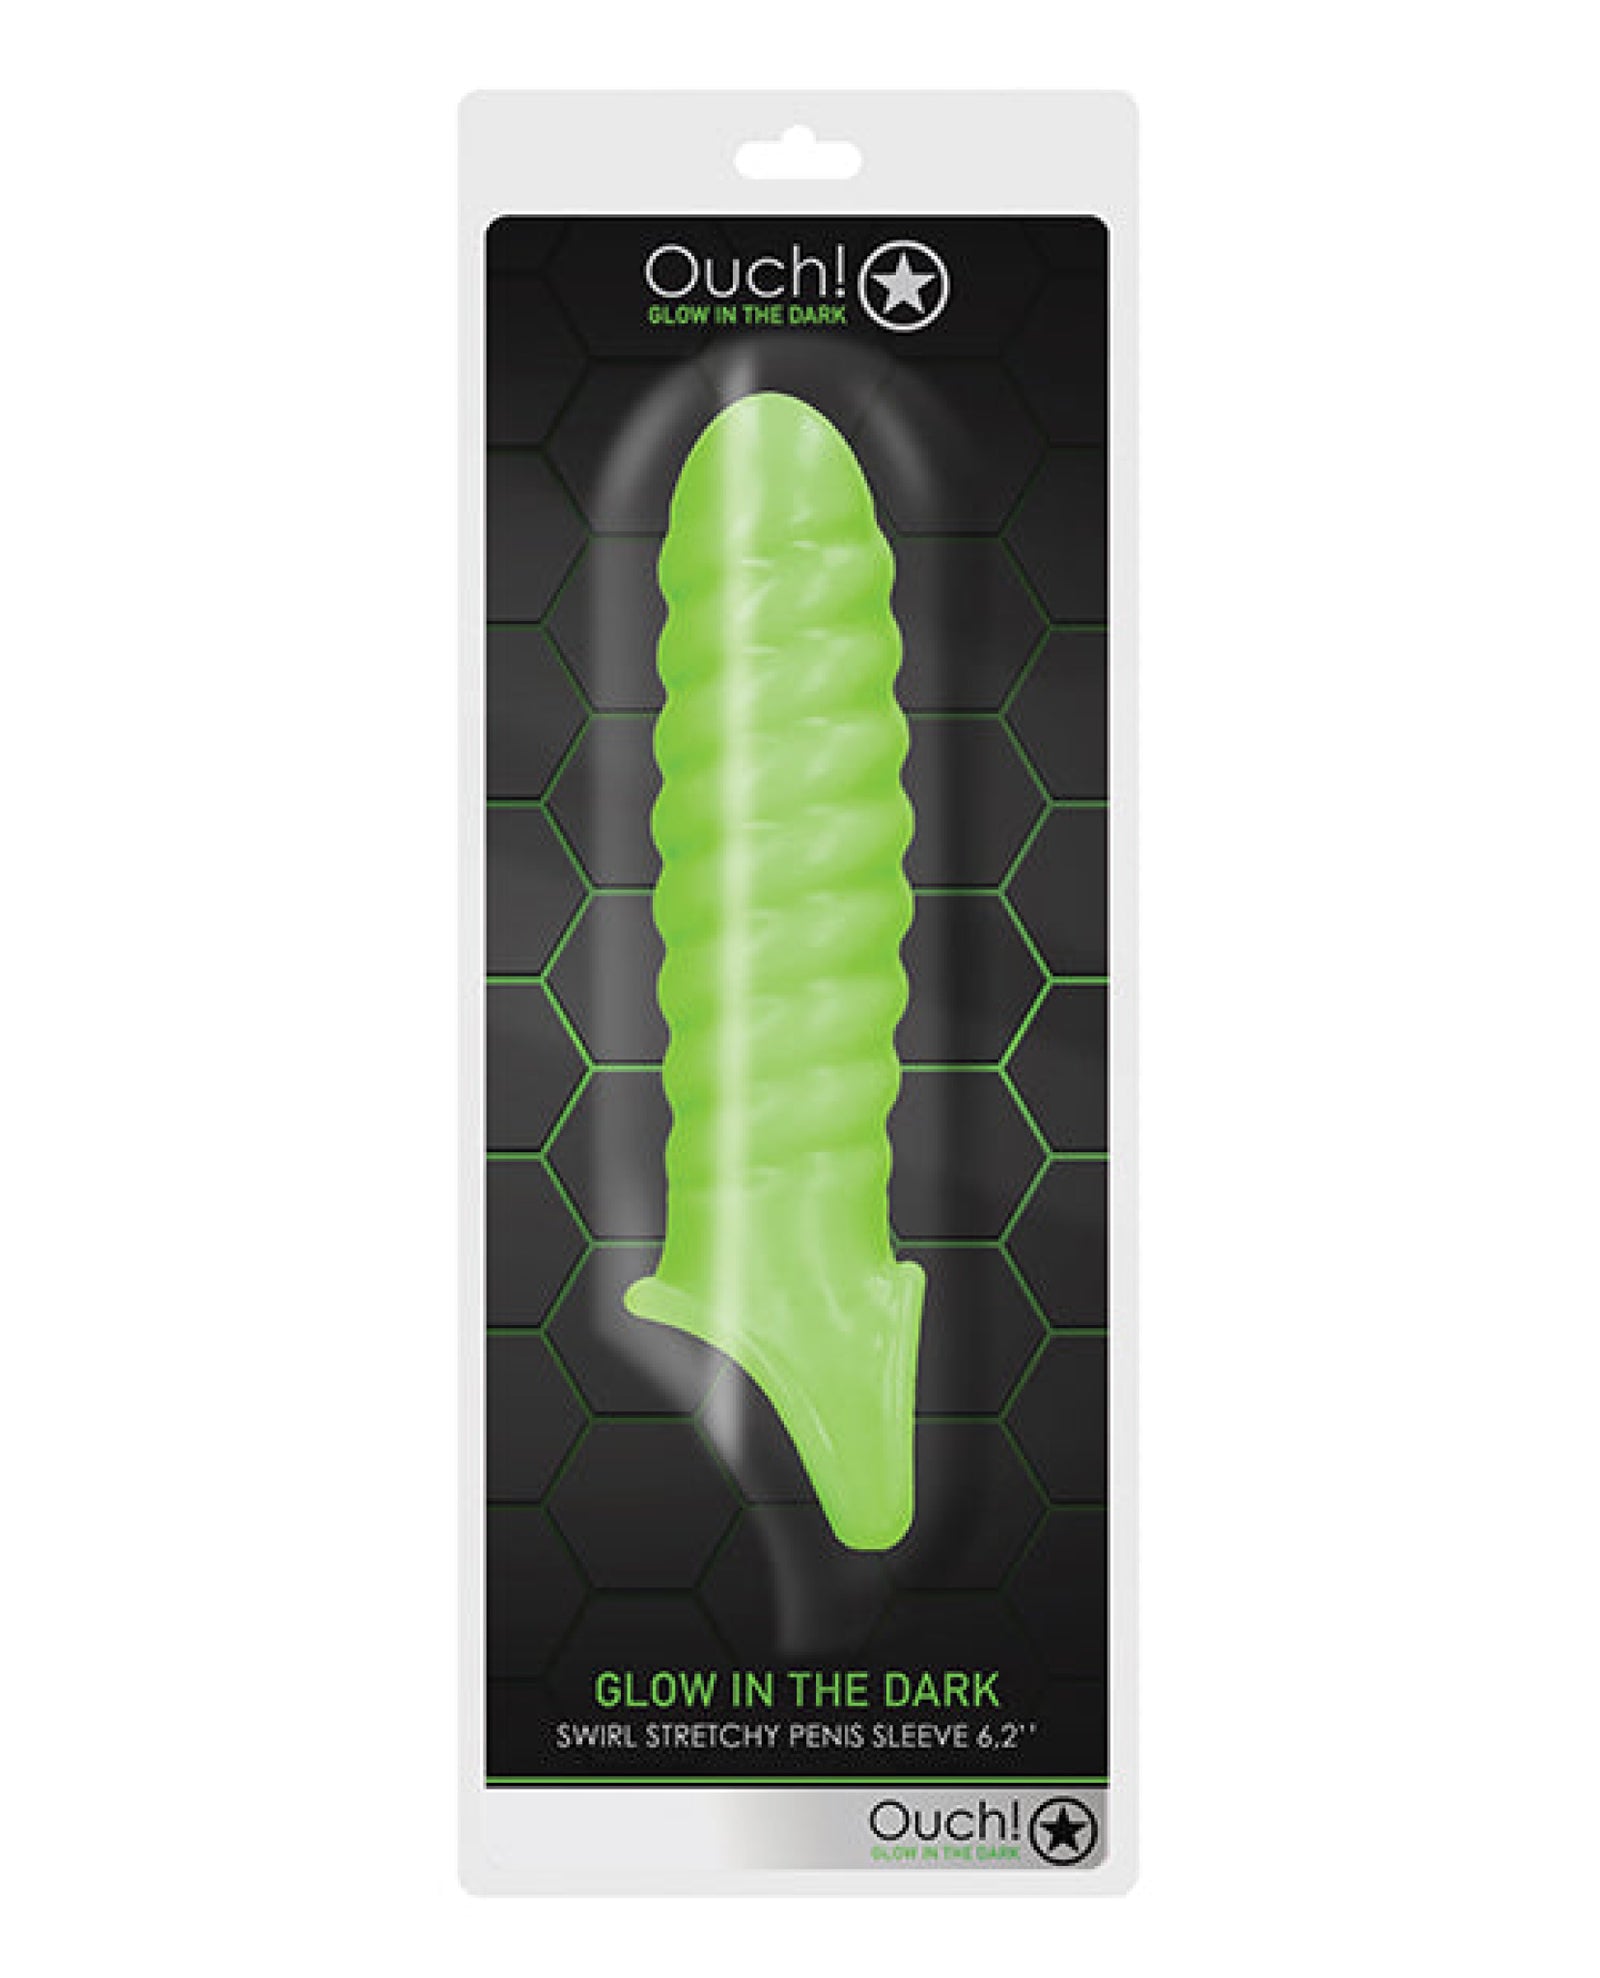 Shots Ouch Swirl Stretchy Penis Sleeve - Glow In The Dark Shots